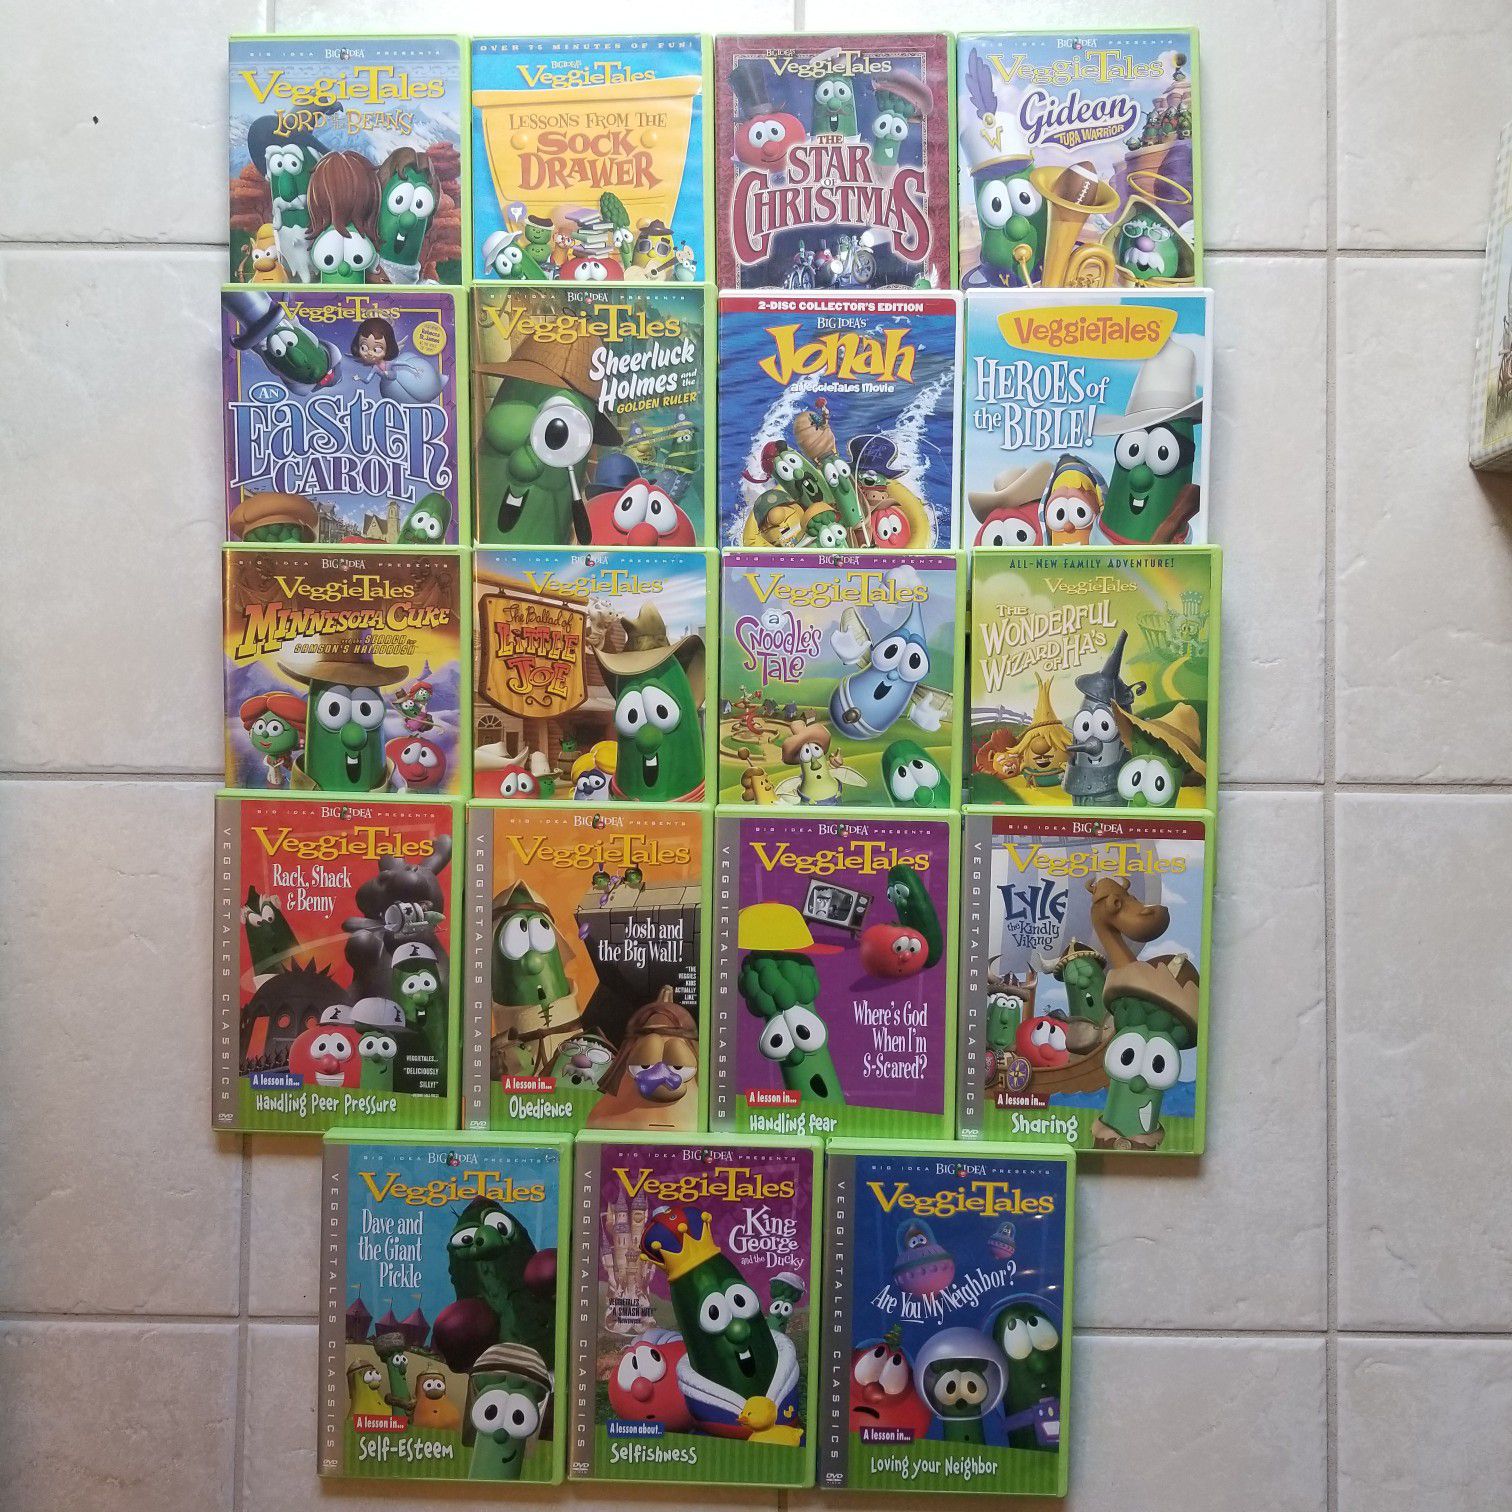 Set of 19 VEGGIE TALES Dvds. All DVDs in very good to great condition.